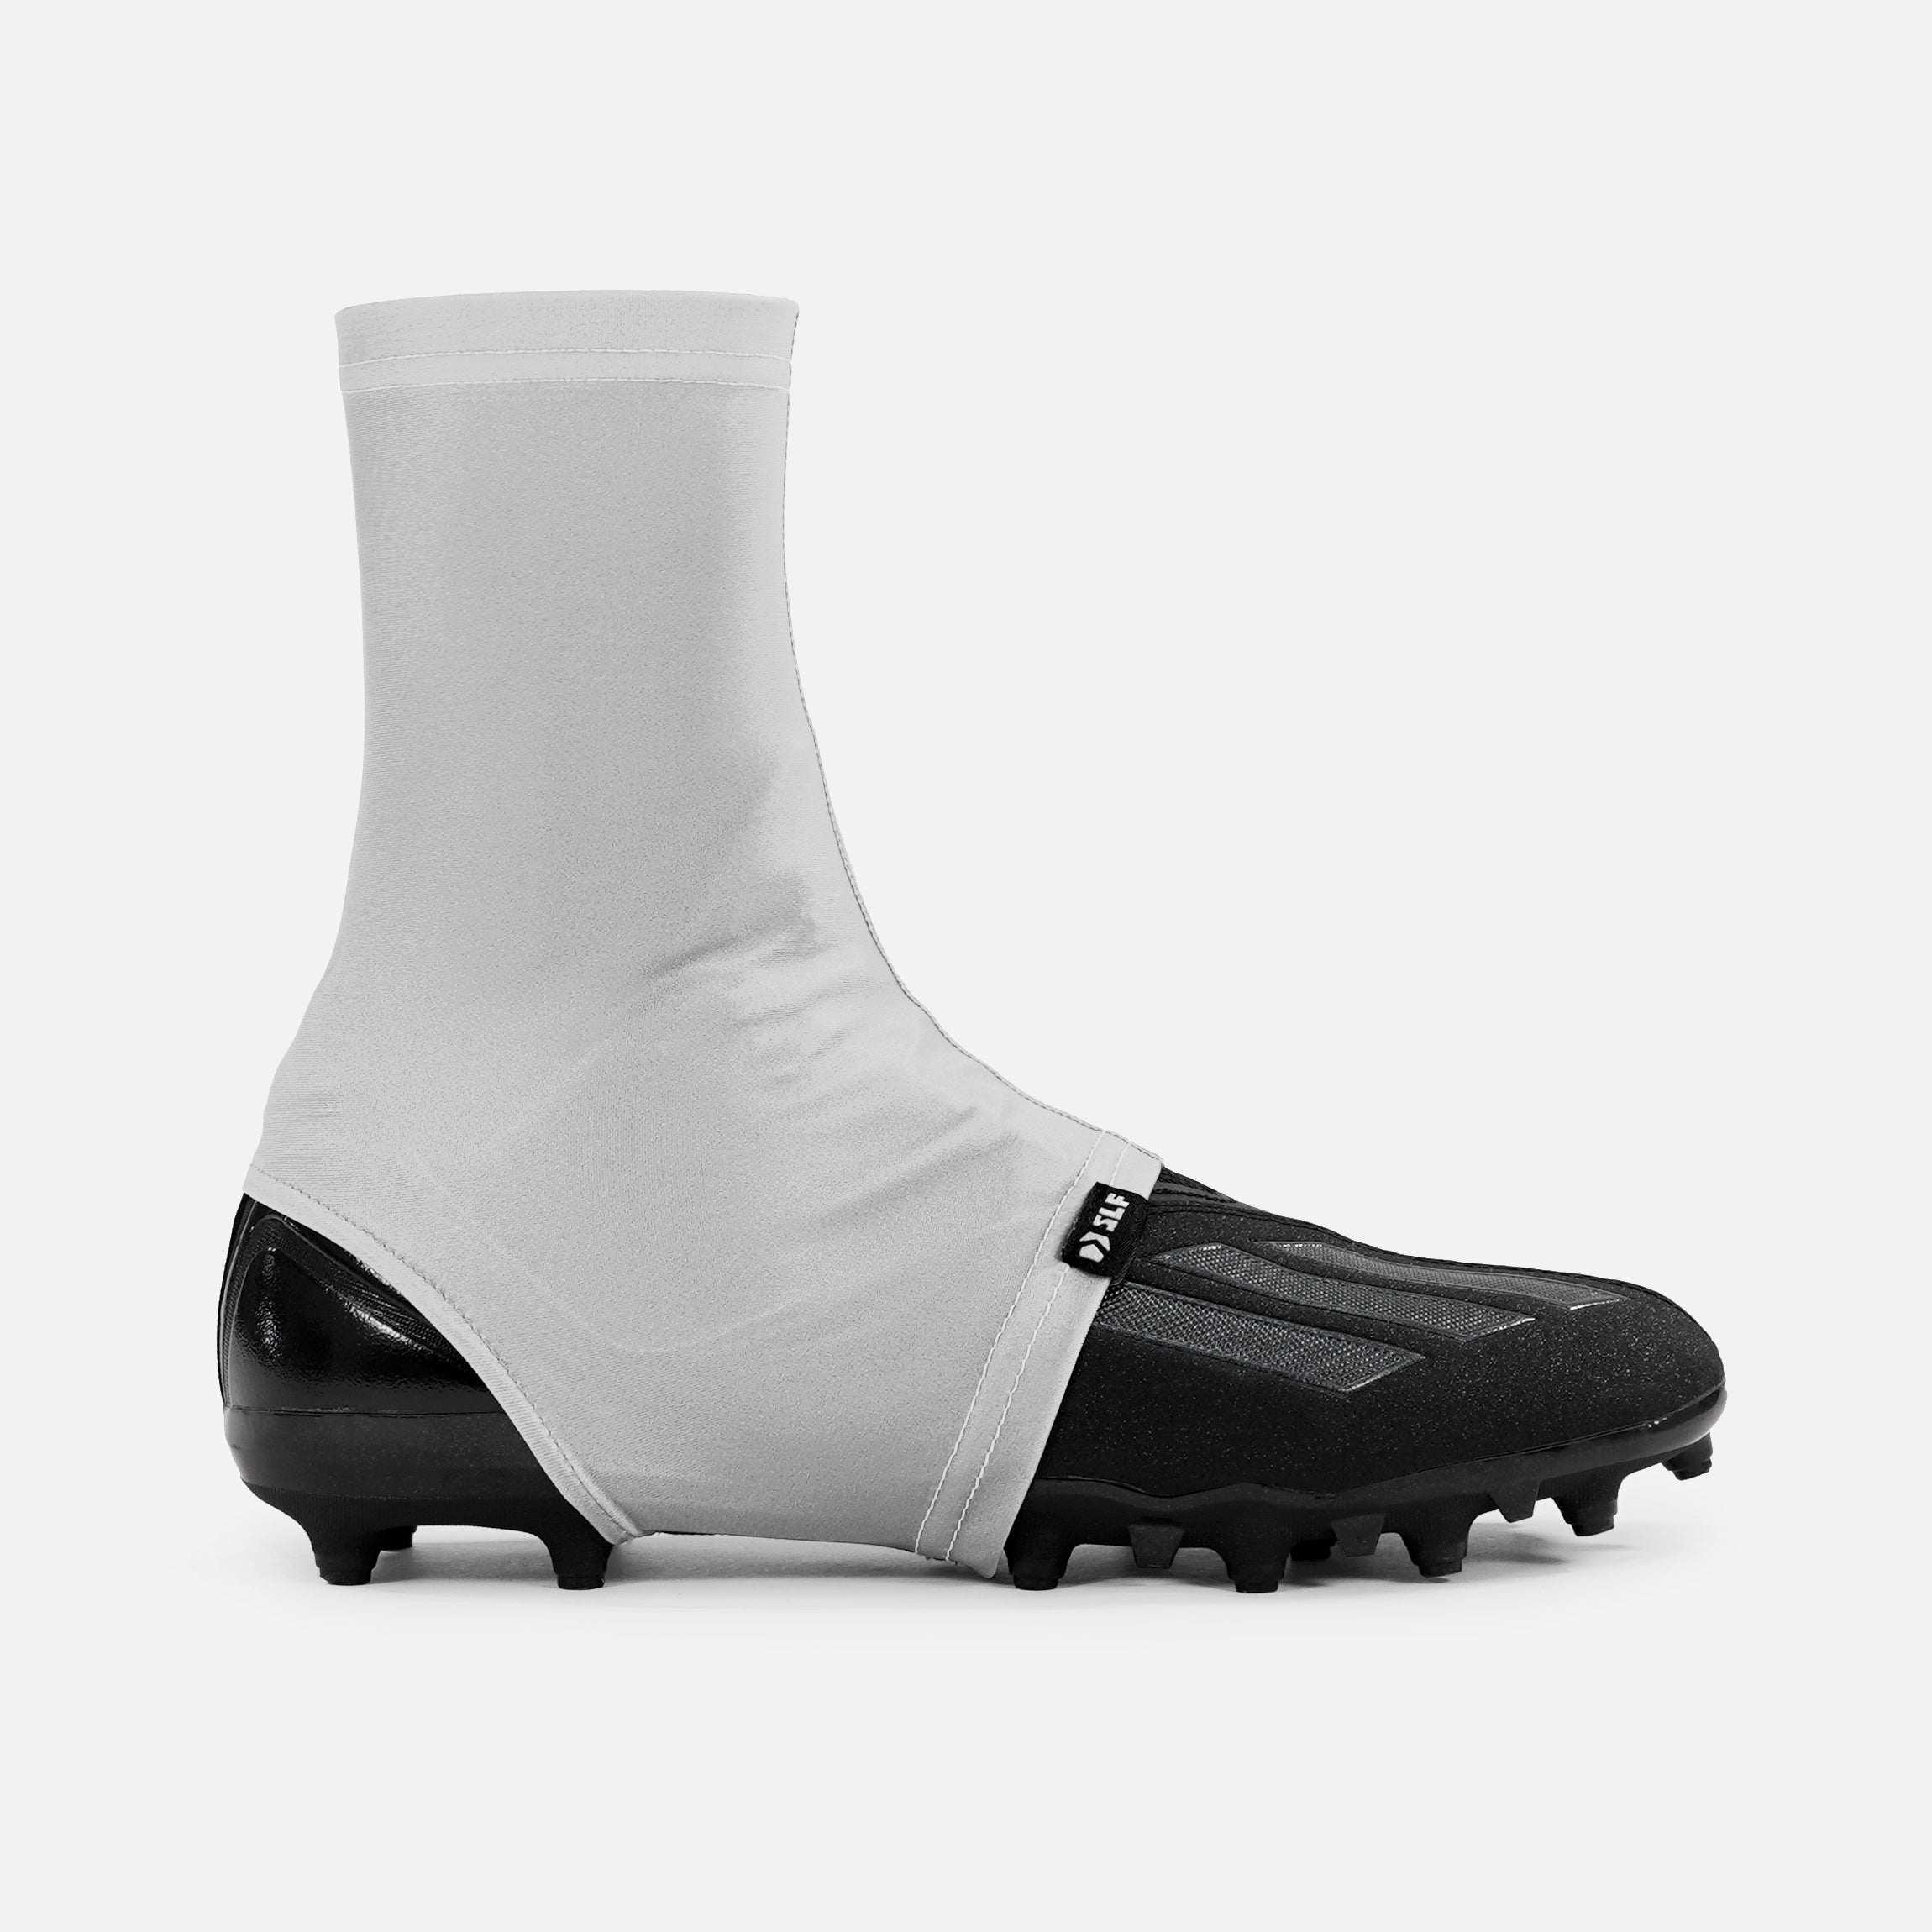 Hue Light Gray Spats / Cleat Covers – SLEEFS